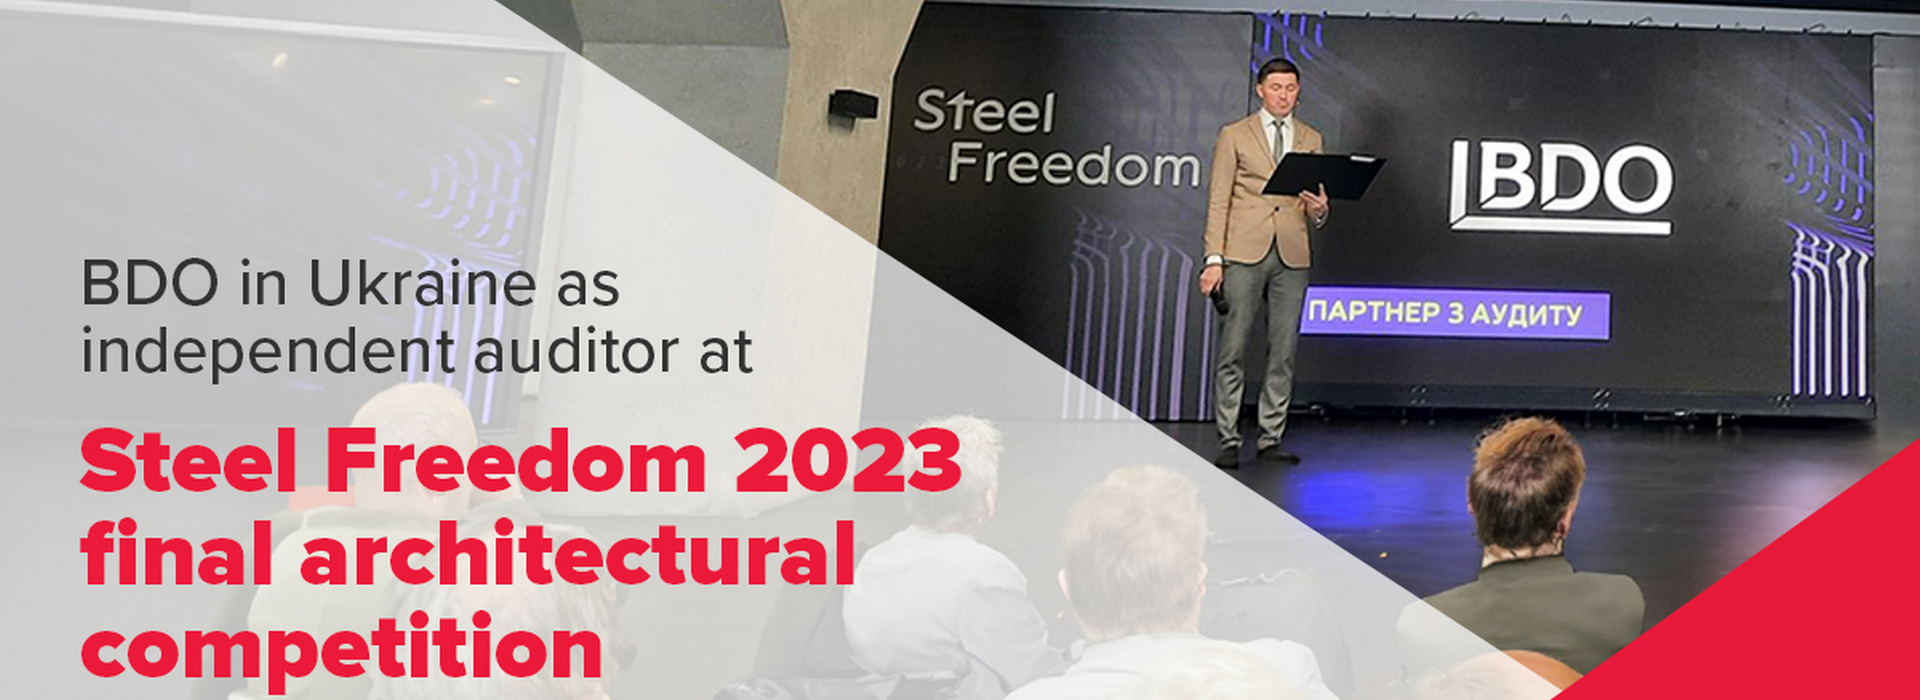 BDO in Ukraine as Independent Auditor at Steel Freedom 2023 Final Architectural Competition